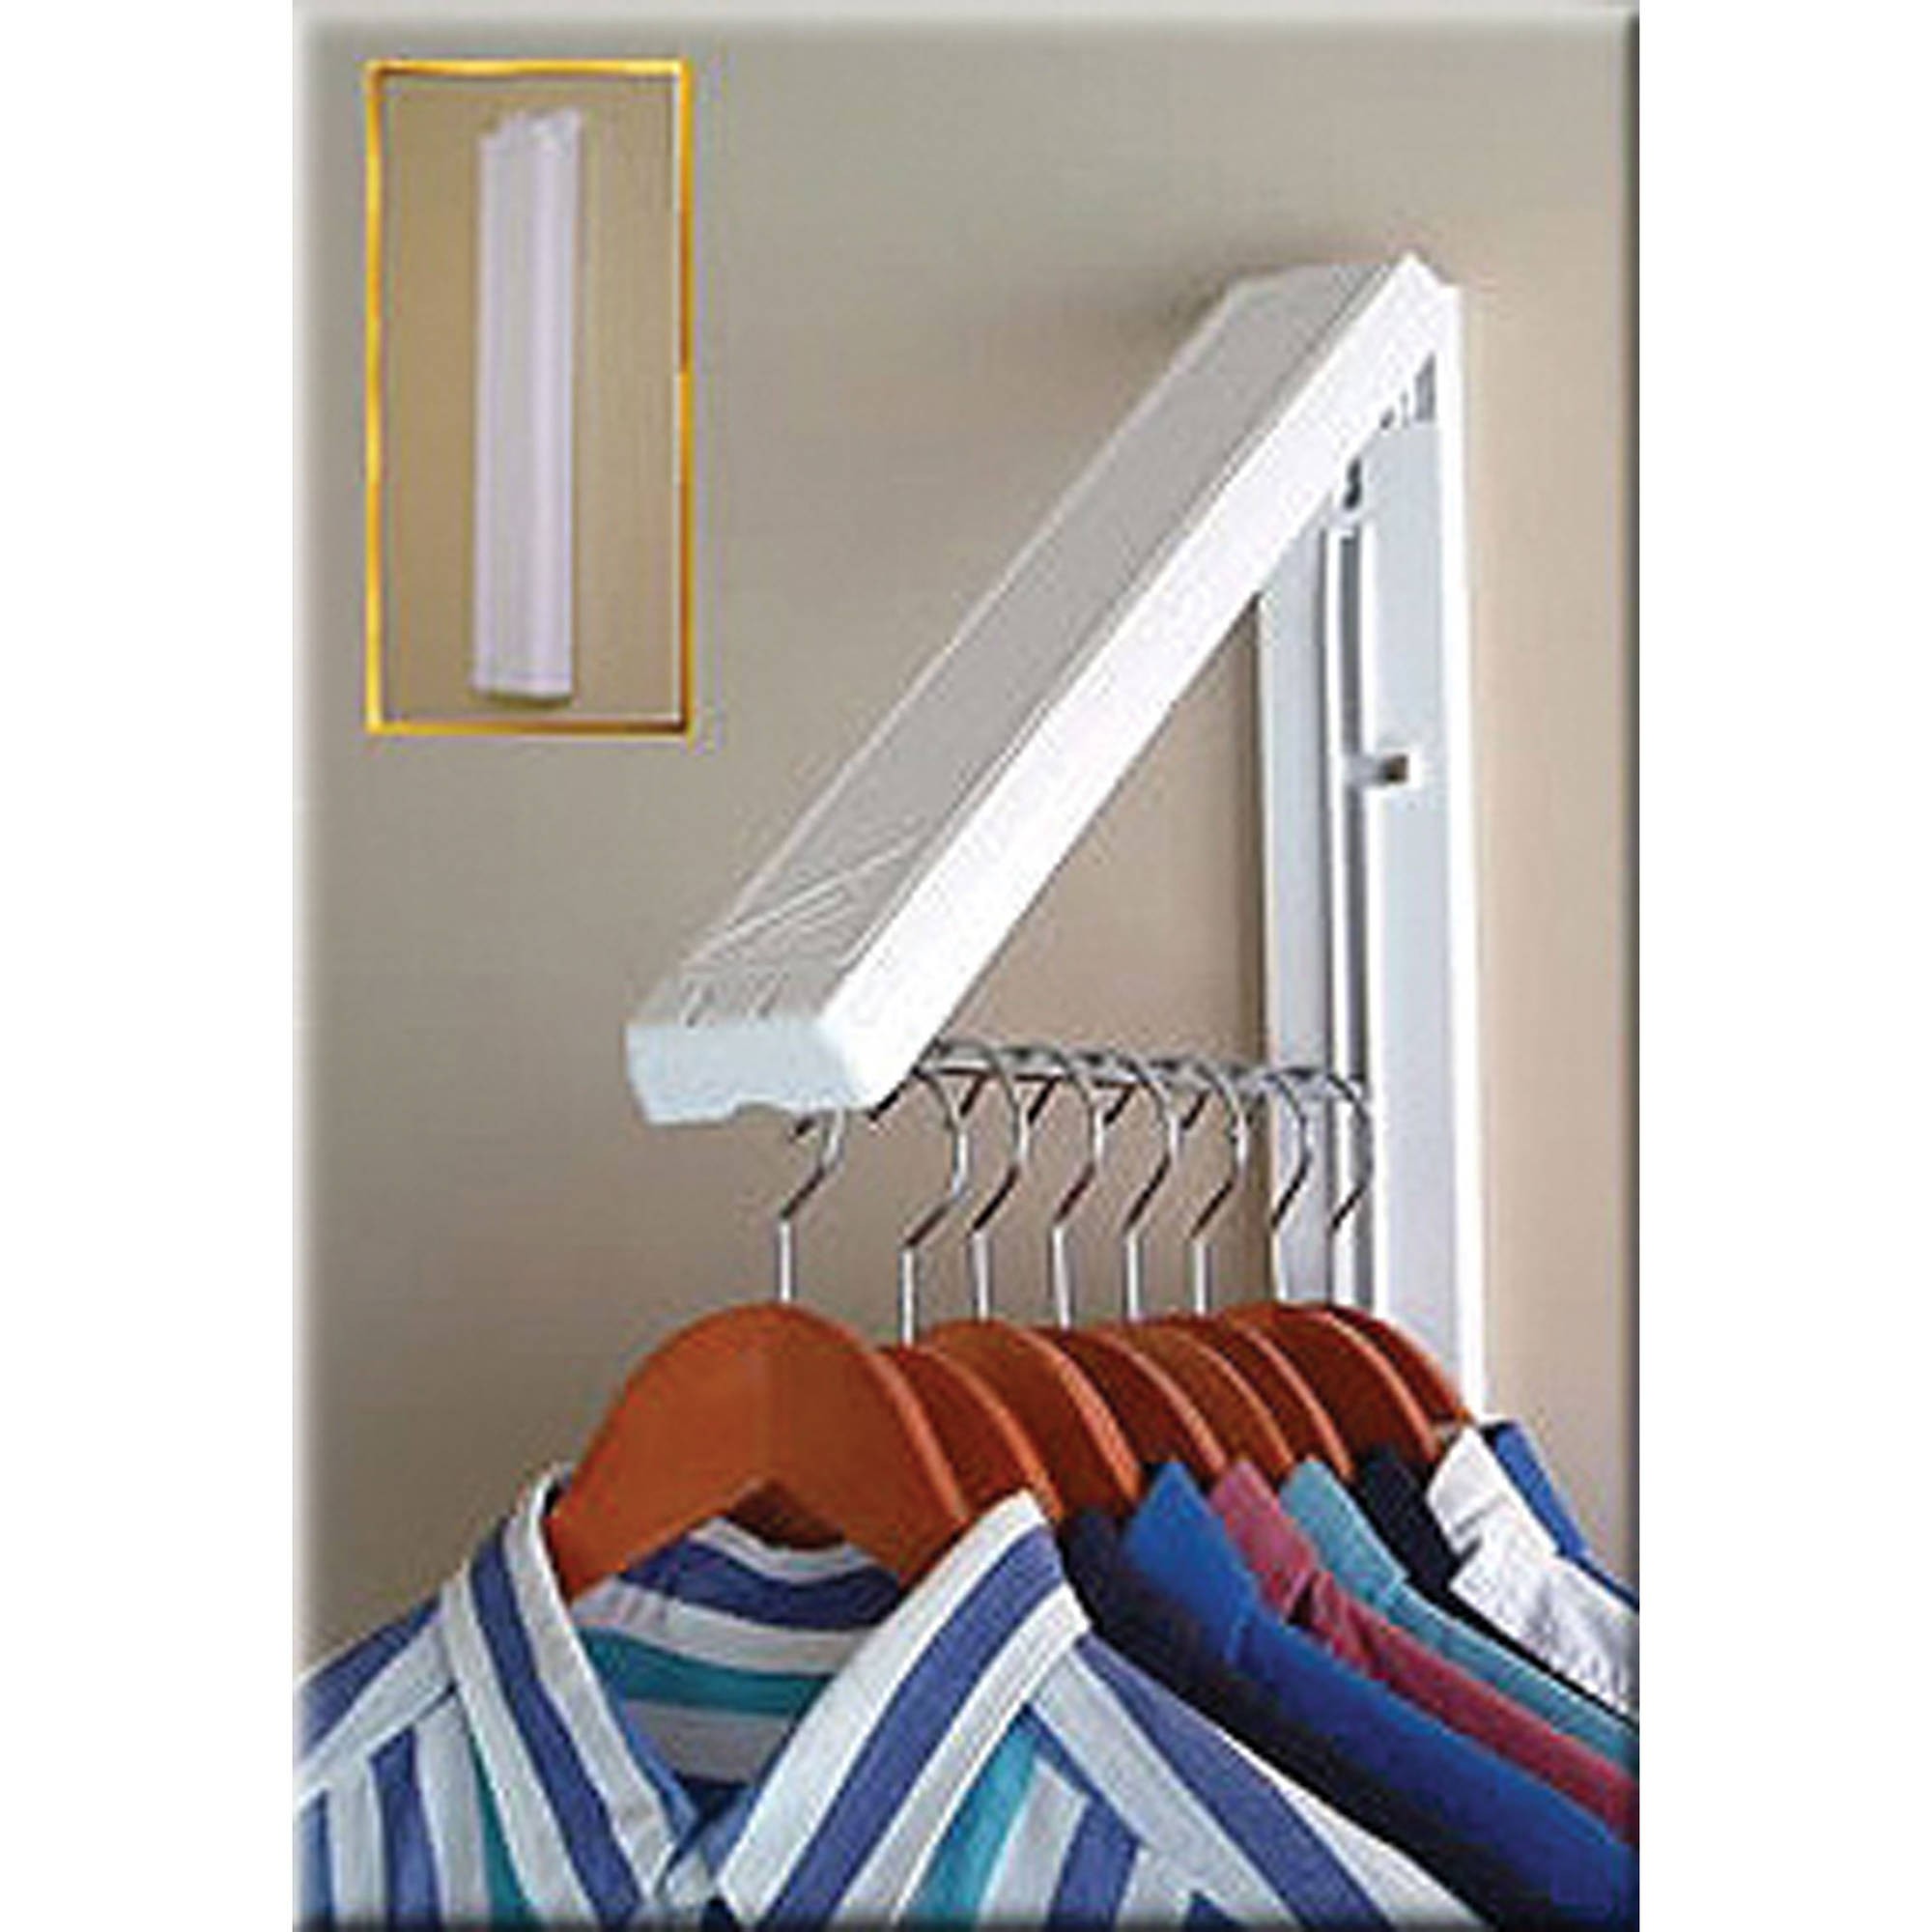 Cloth Hanger Laundry Drying Closet Rack Wall Folding Collapsible Storage Ho L8B4 